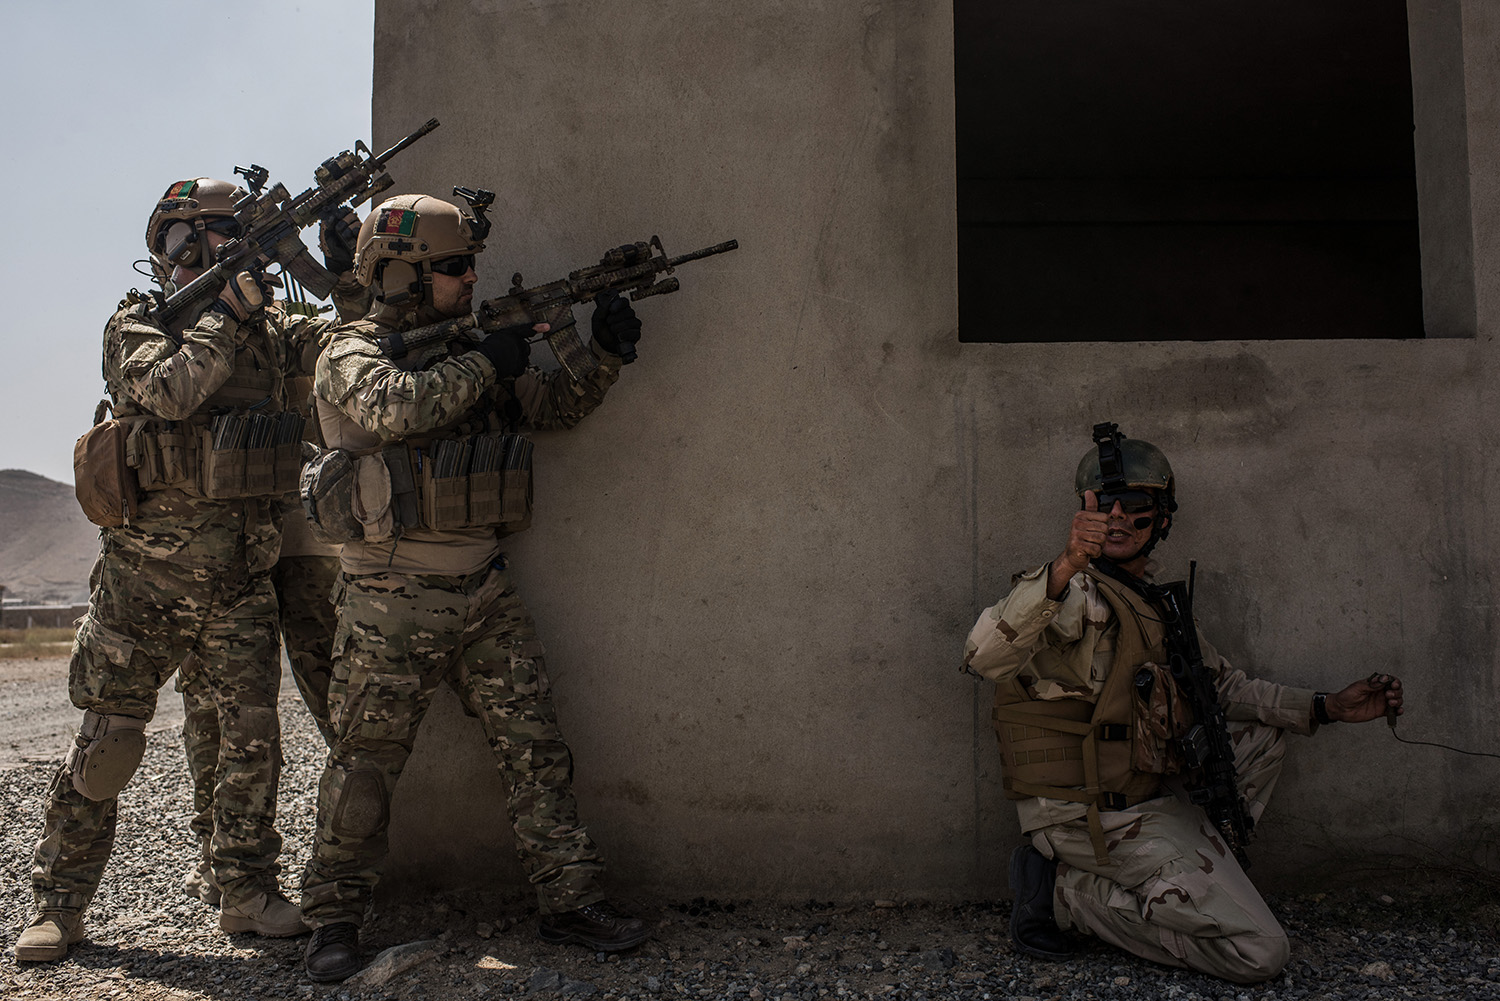 Members of Afghanistan's Crisis Response Unit 222, an Afghan Special Police Unit, participate in a training slowed down for the media on September 7, 2017 at Camp Lion in Kabul, Afghanistan. Currently the United States has about 11,000 troops in the deployed in Afghanistan, with a reported 4,000 more expected to arrive in the coming weeks. With the arrival of more troops, Resolute Support, the coalition train, advise, and assist mission, hopes to train almost double the amount of Afghan Special Forces and Special Police Units. (Photo by Andrew Renneisen/Getty Images)